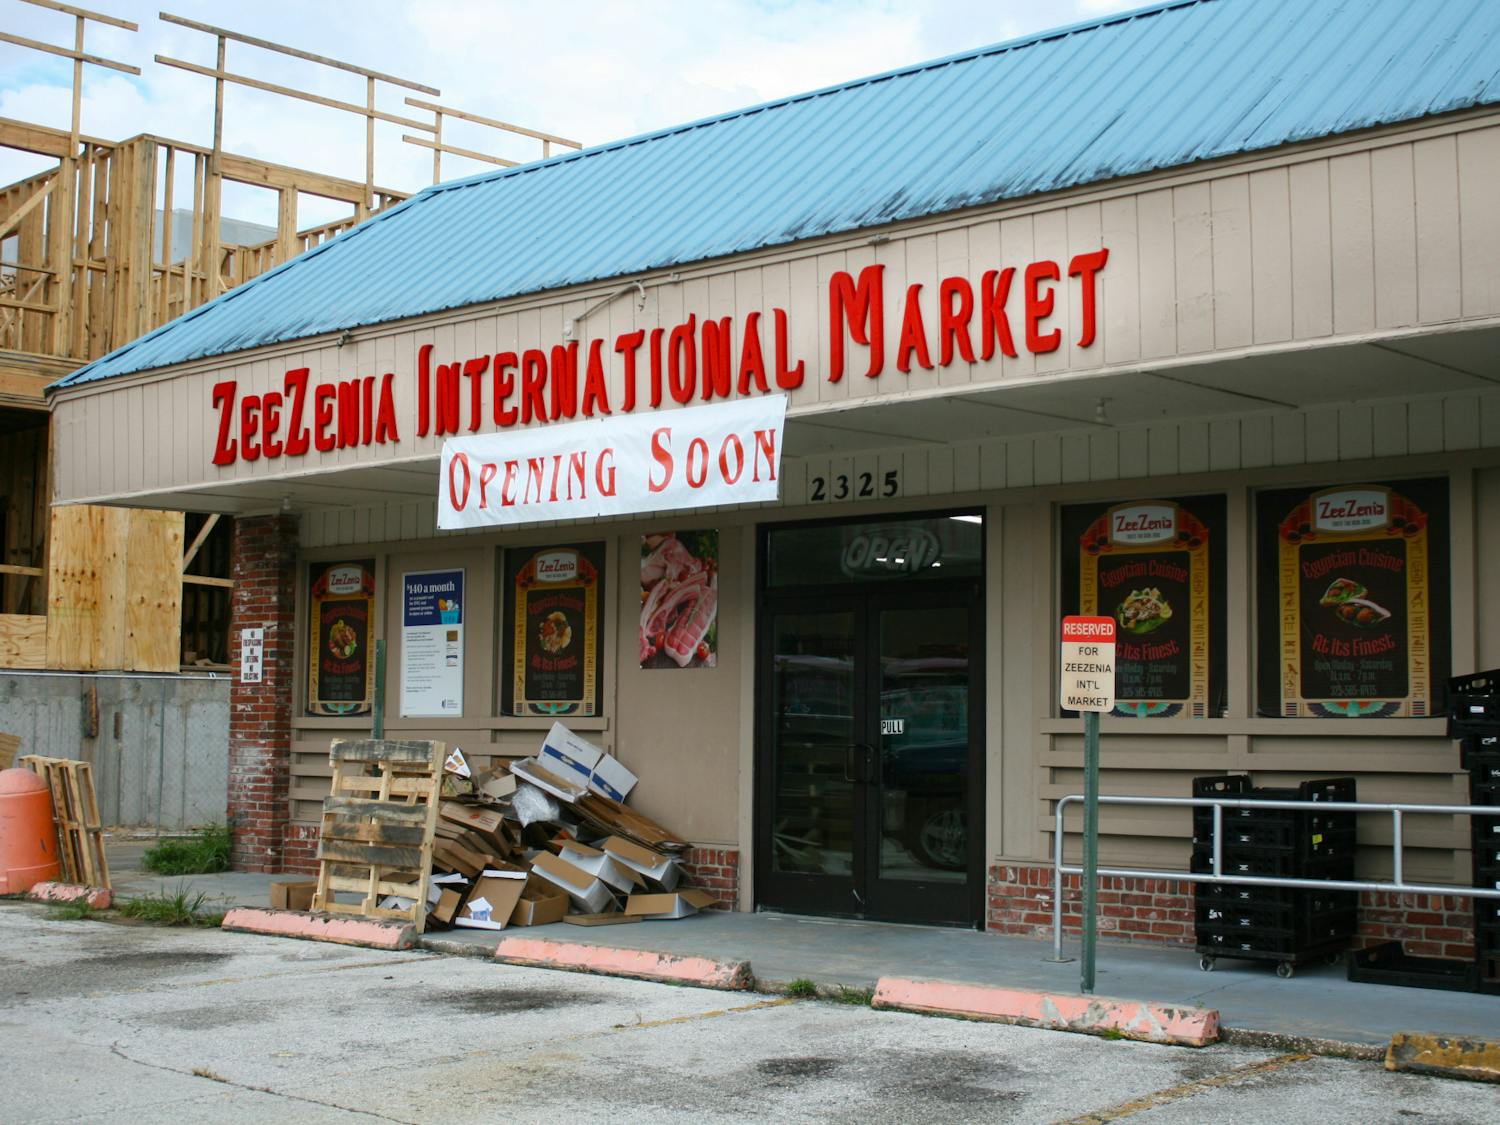 ZeeZenia International Market under construction after a fire tarnished the inside Tuesday, Sept. 13, 2022. It is set to reopen on Friday, Sept. 23, 2022.